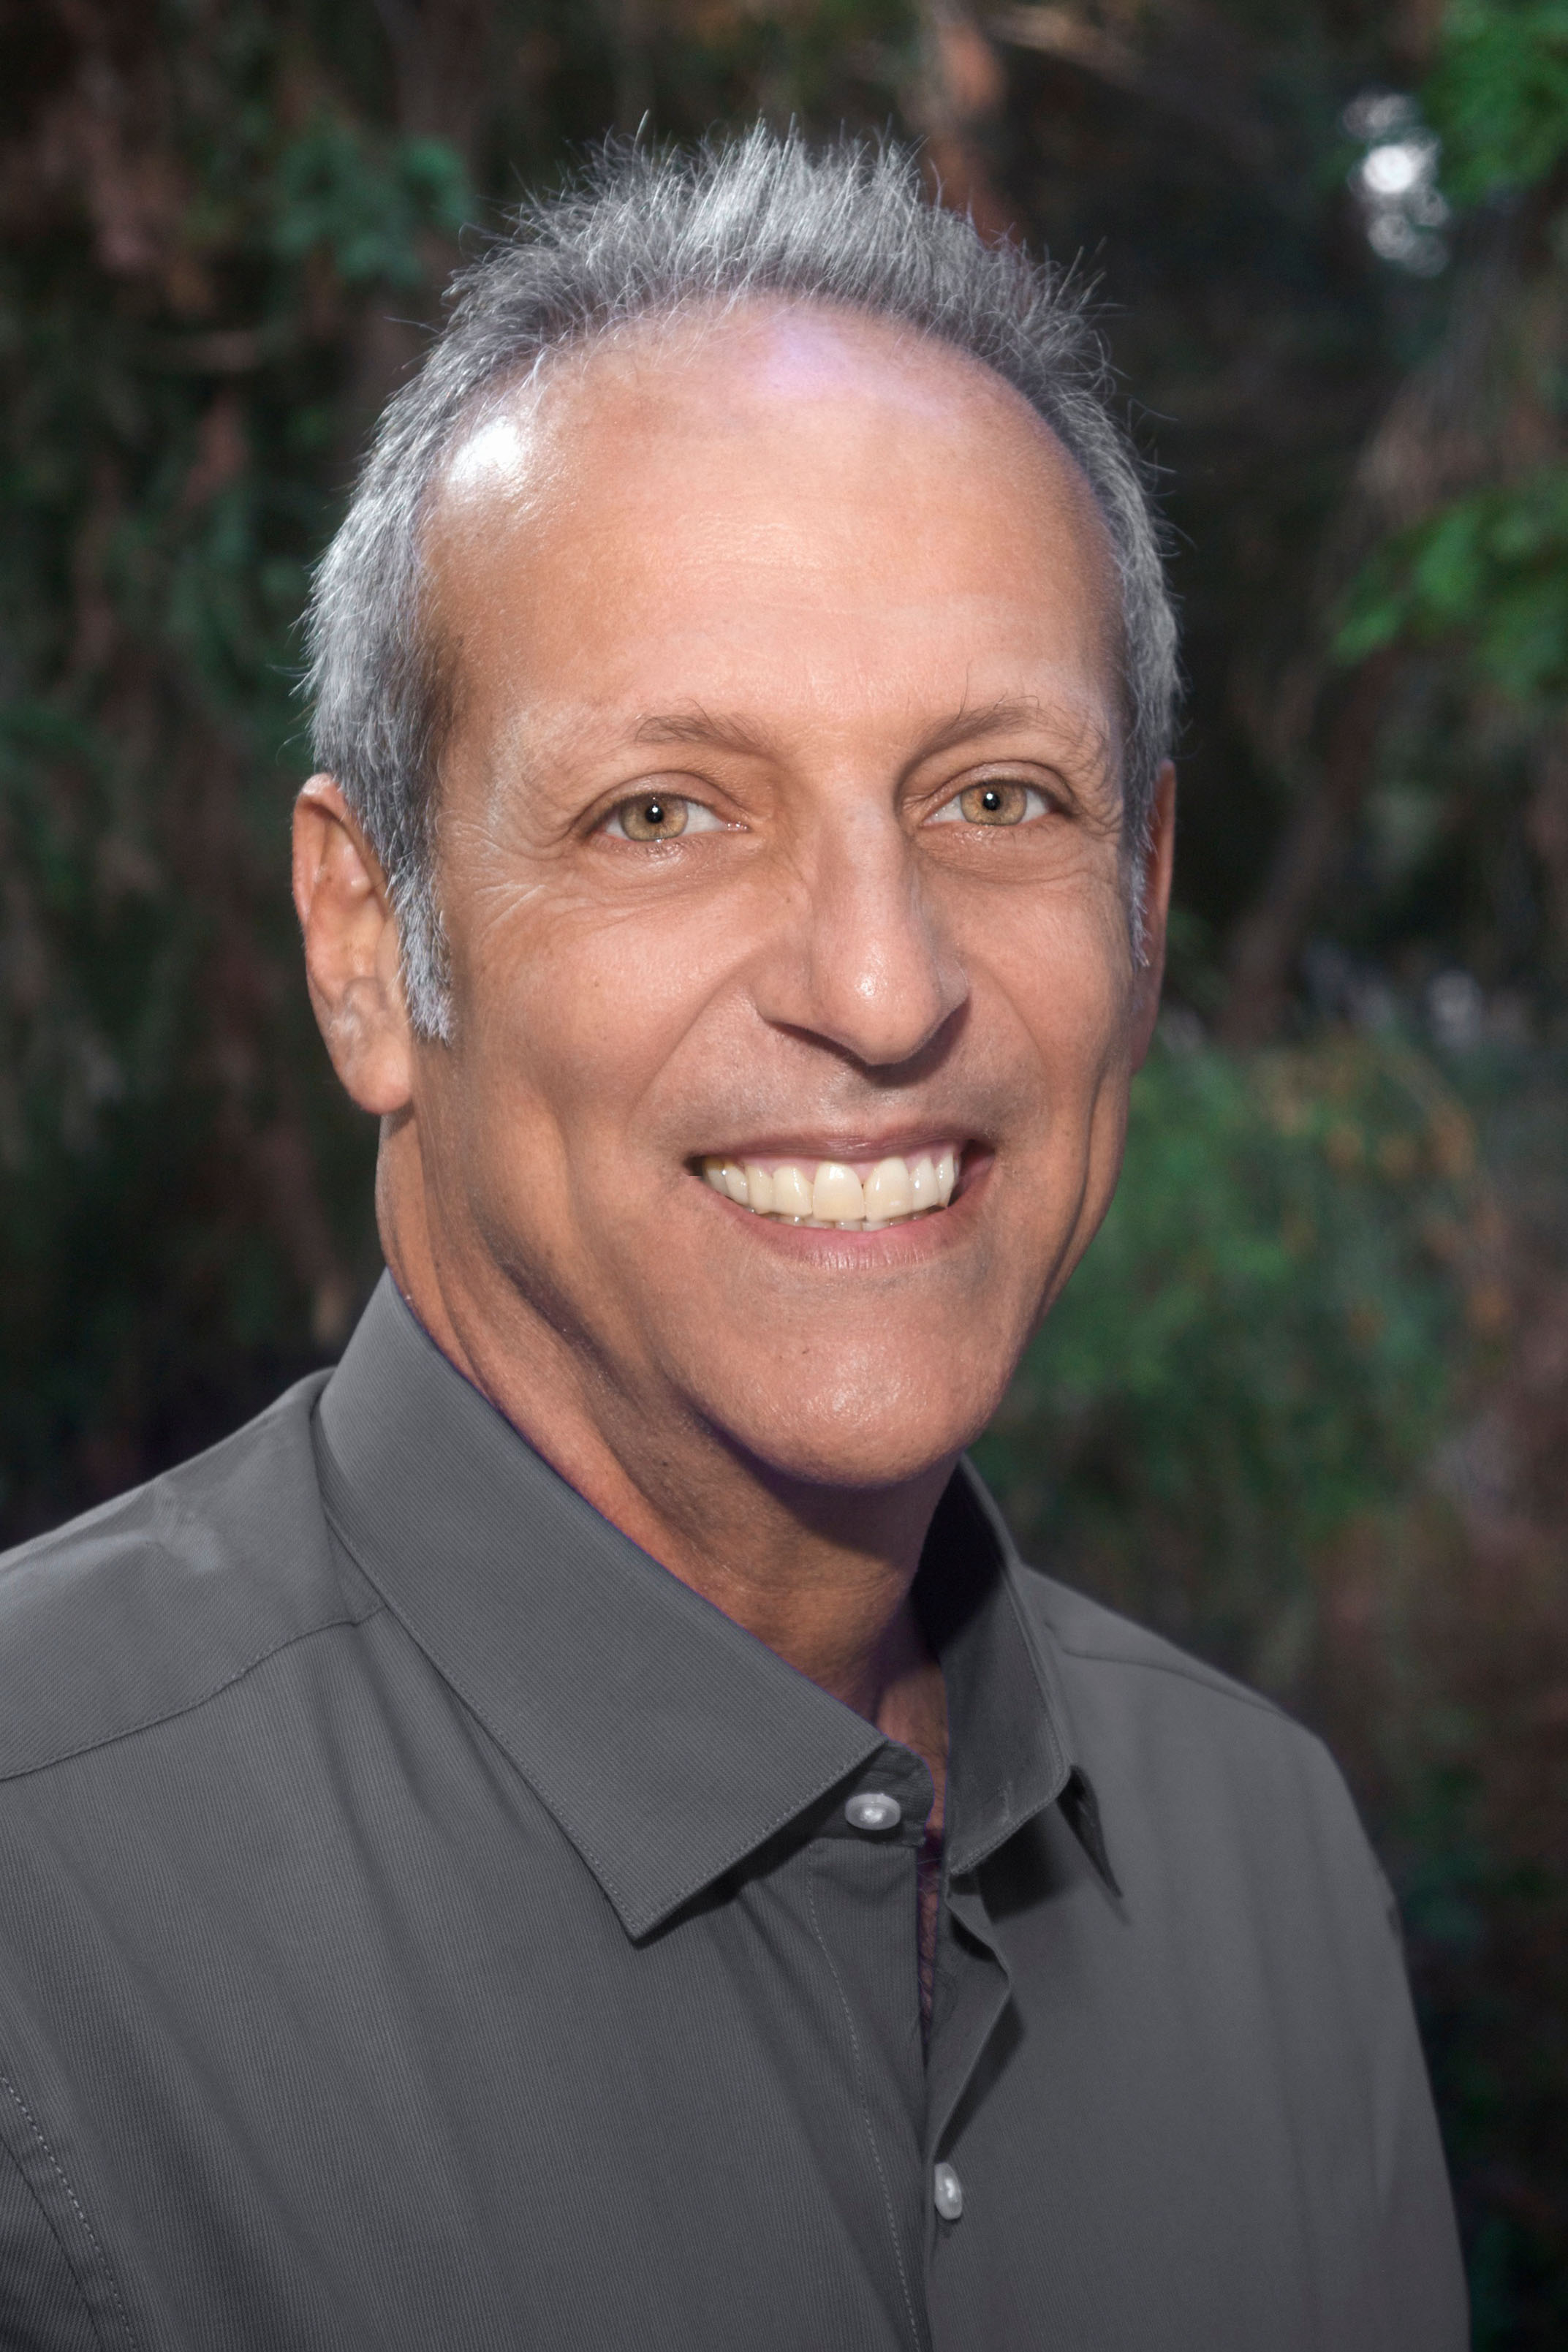 Photo of a man smiling, dressed in a button-up shirt.